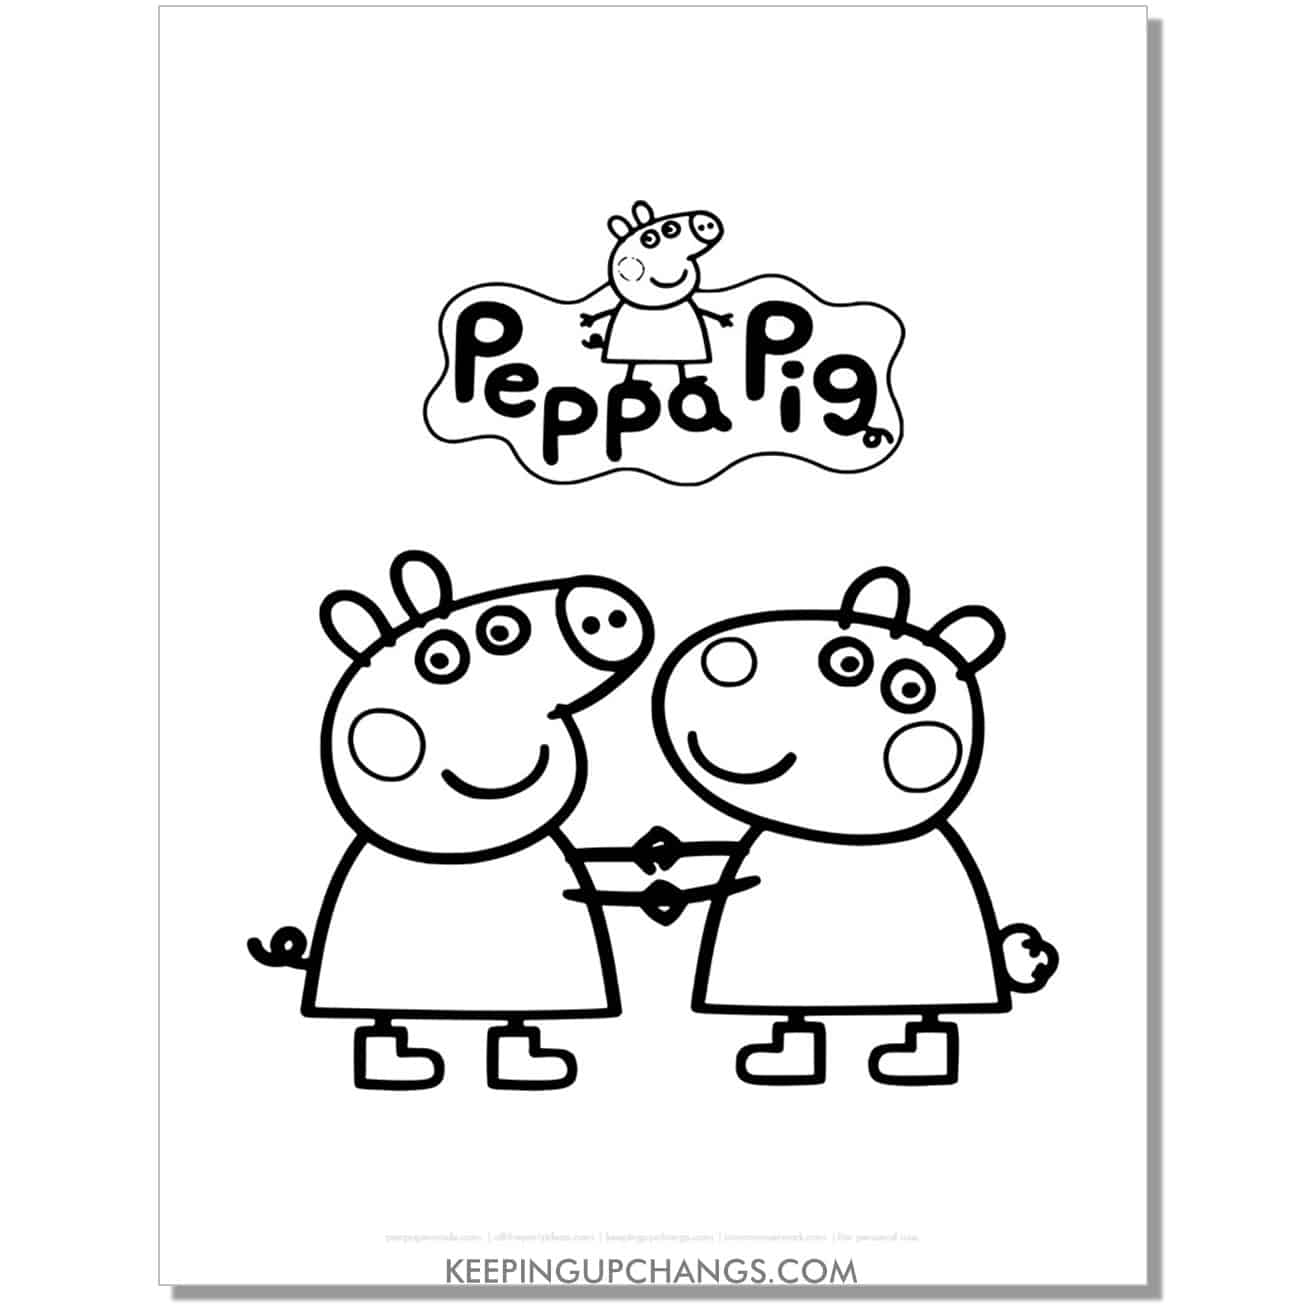 free suzy sheep and peppa pig holding hands coloring page, sheet.